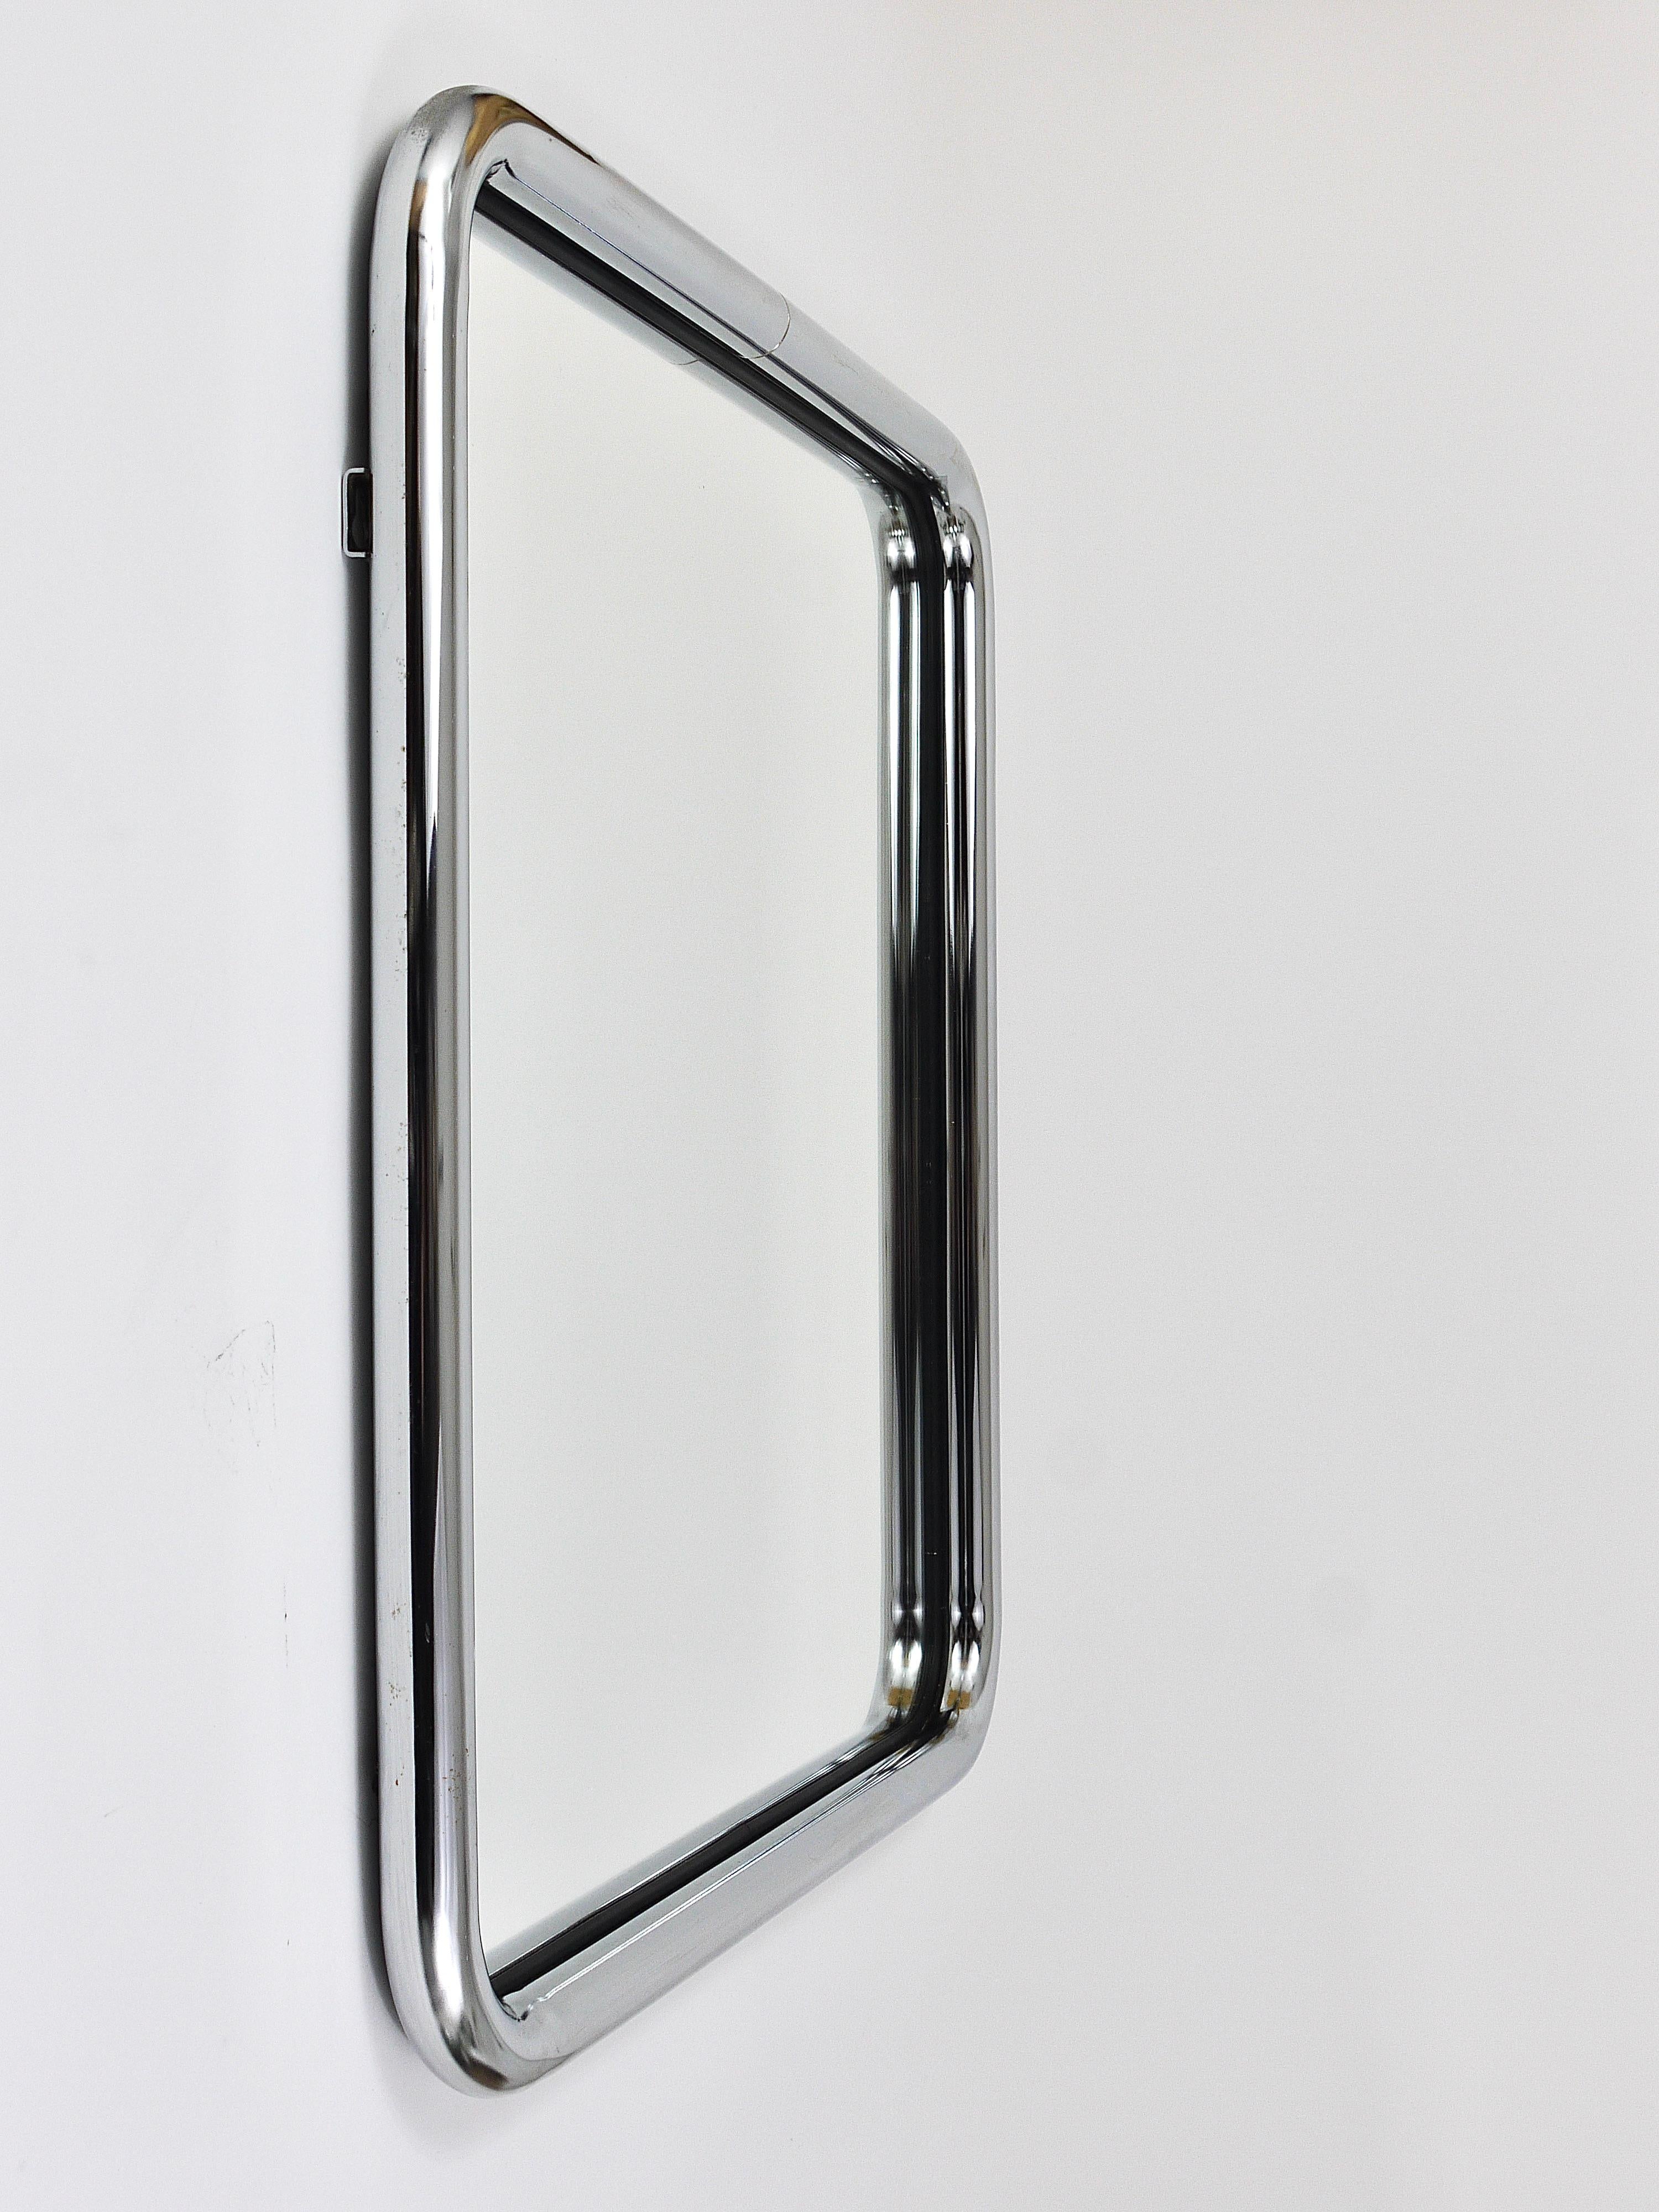 A beautiful postmodern square wall mirror with a frame of chrome-plated tubular steel from the 1970s. Attributed to Howard Miller for MDA (Merrow Design Associates). In very good condition.